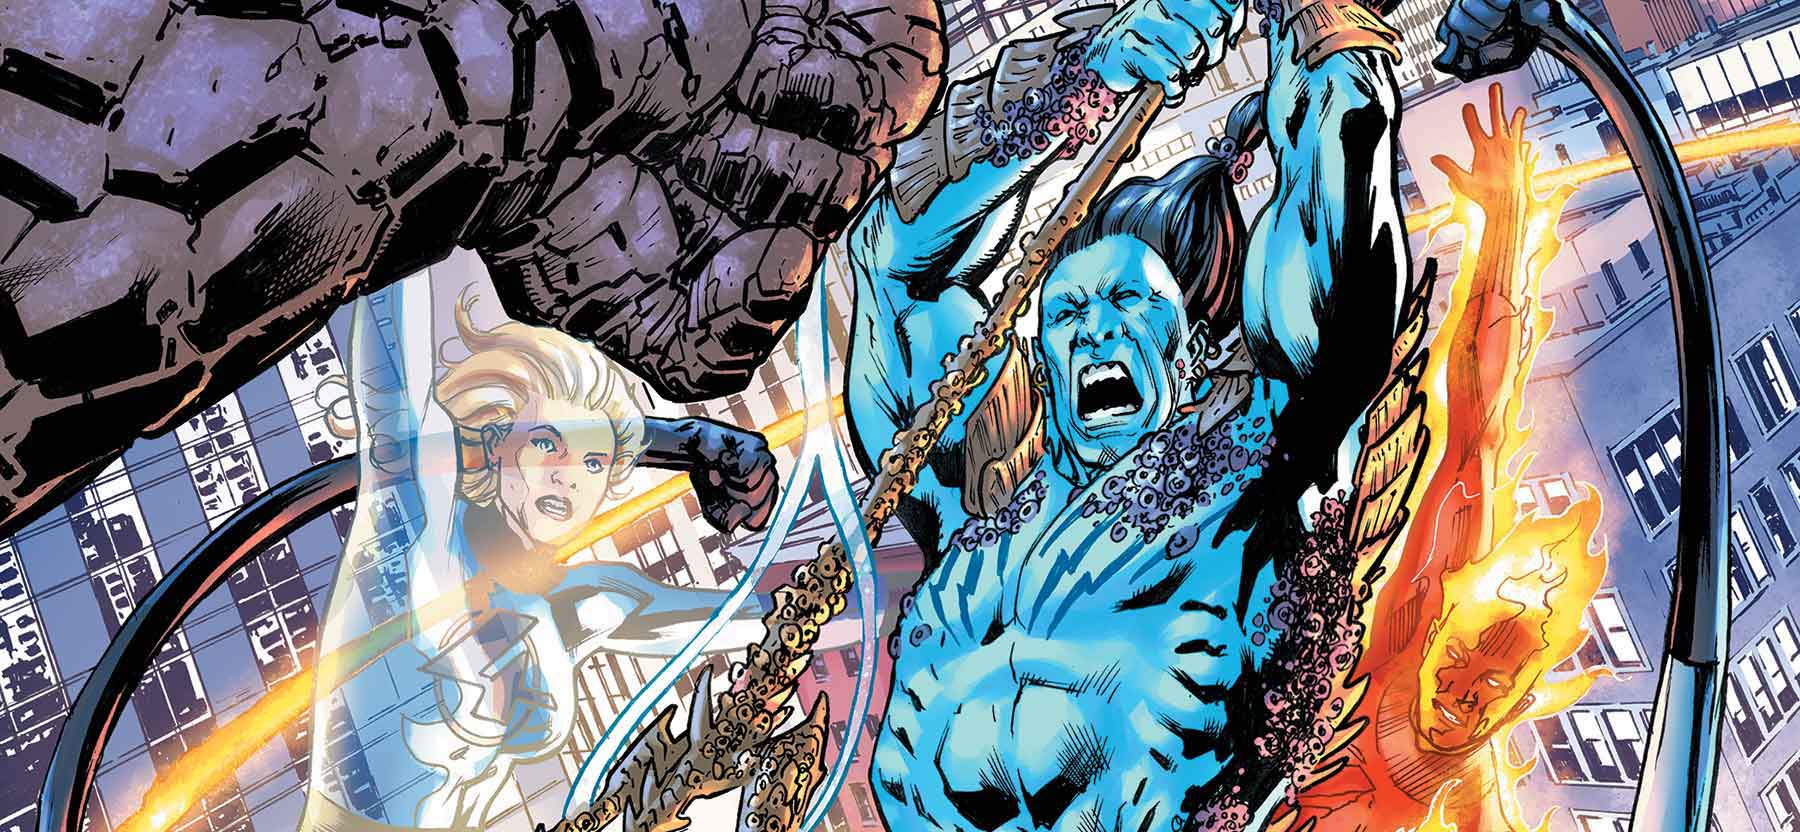 'Giant-Size Fantastic Four' #1 has Namor clash with the First Family